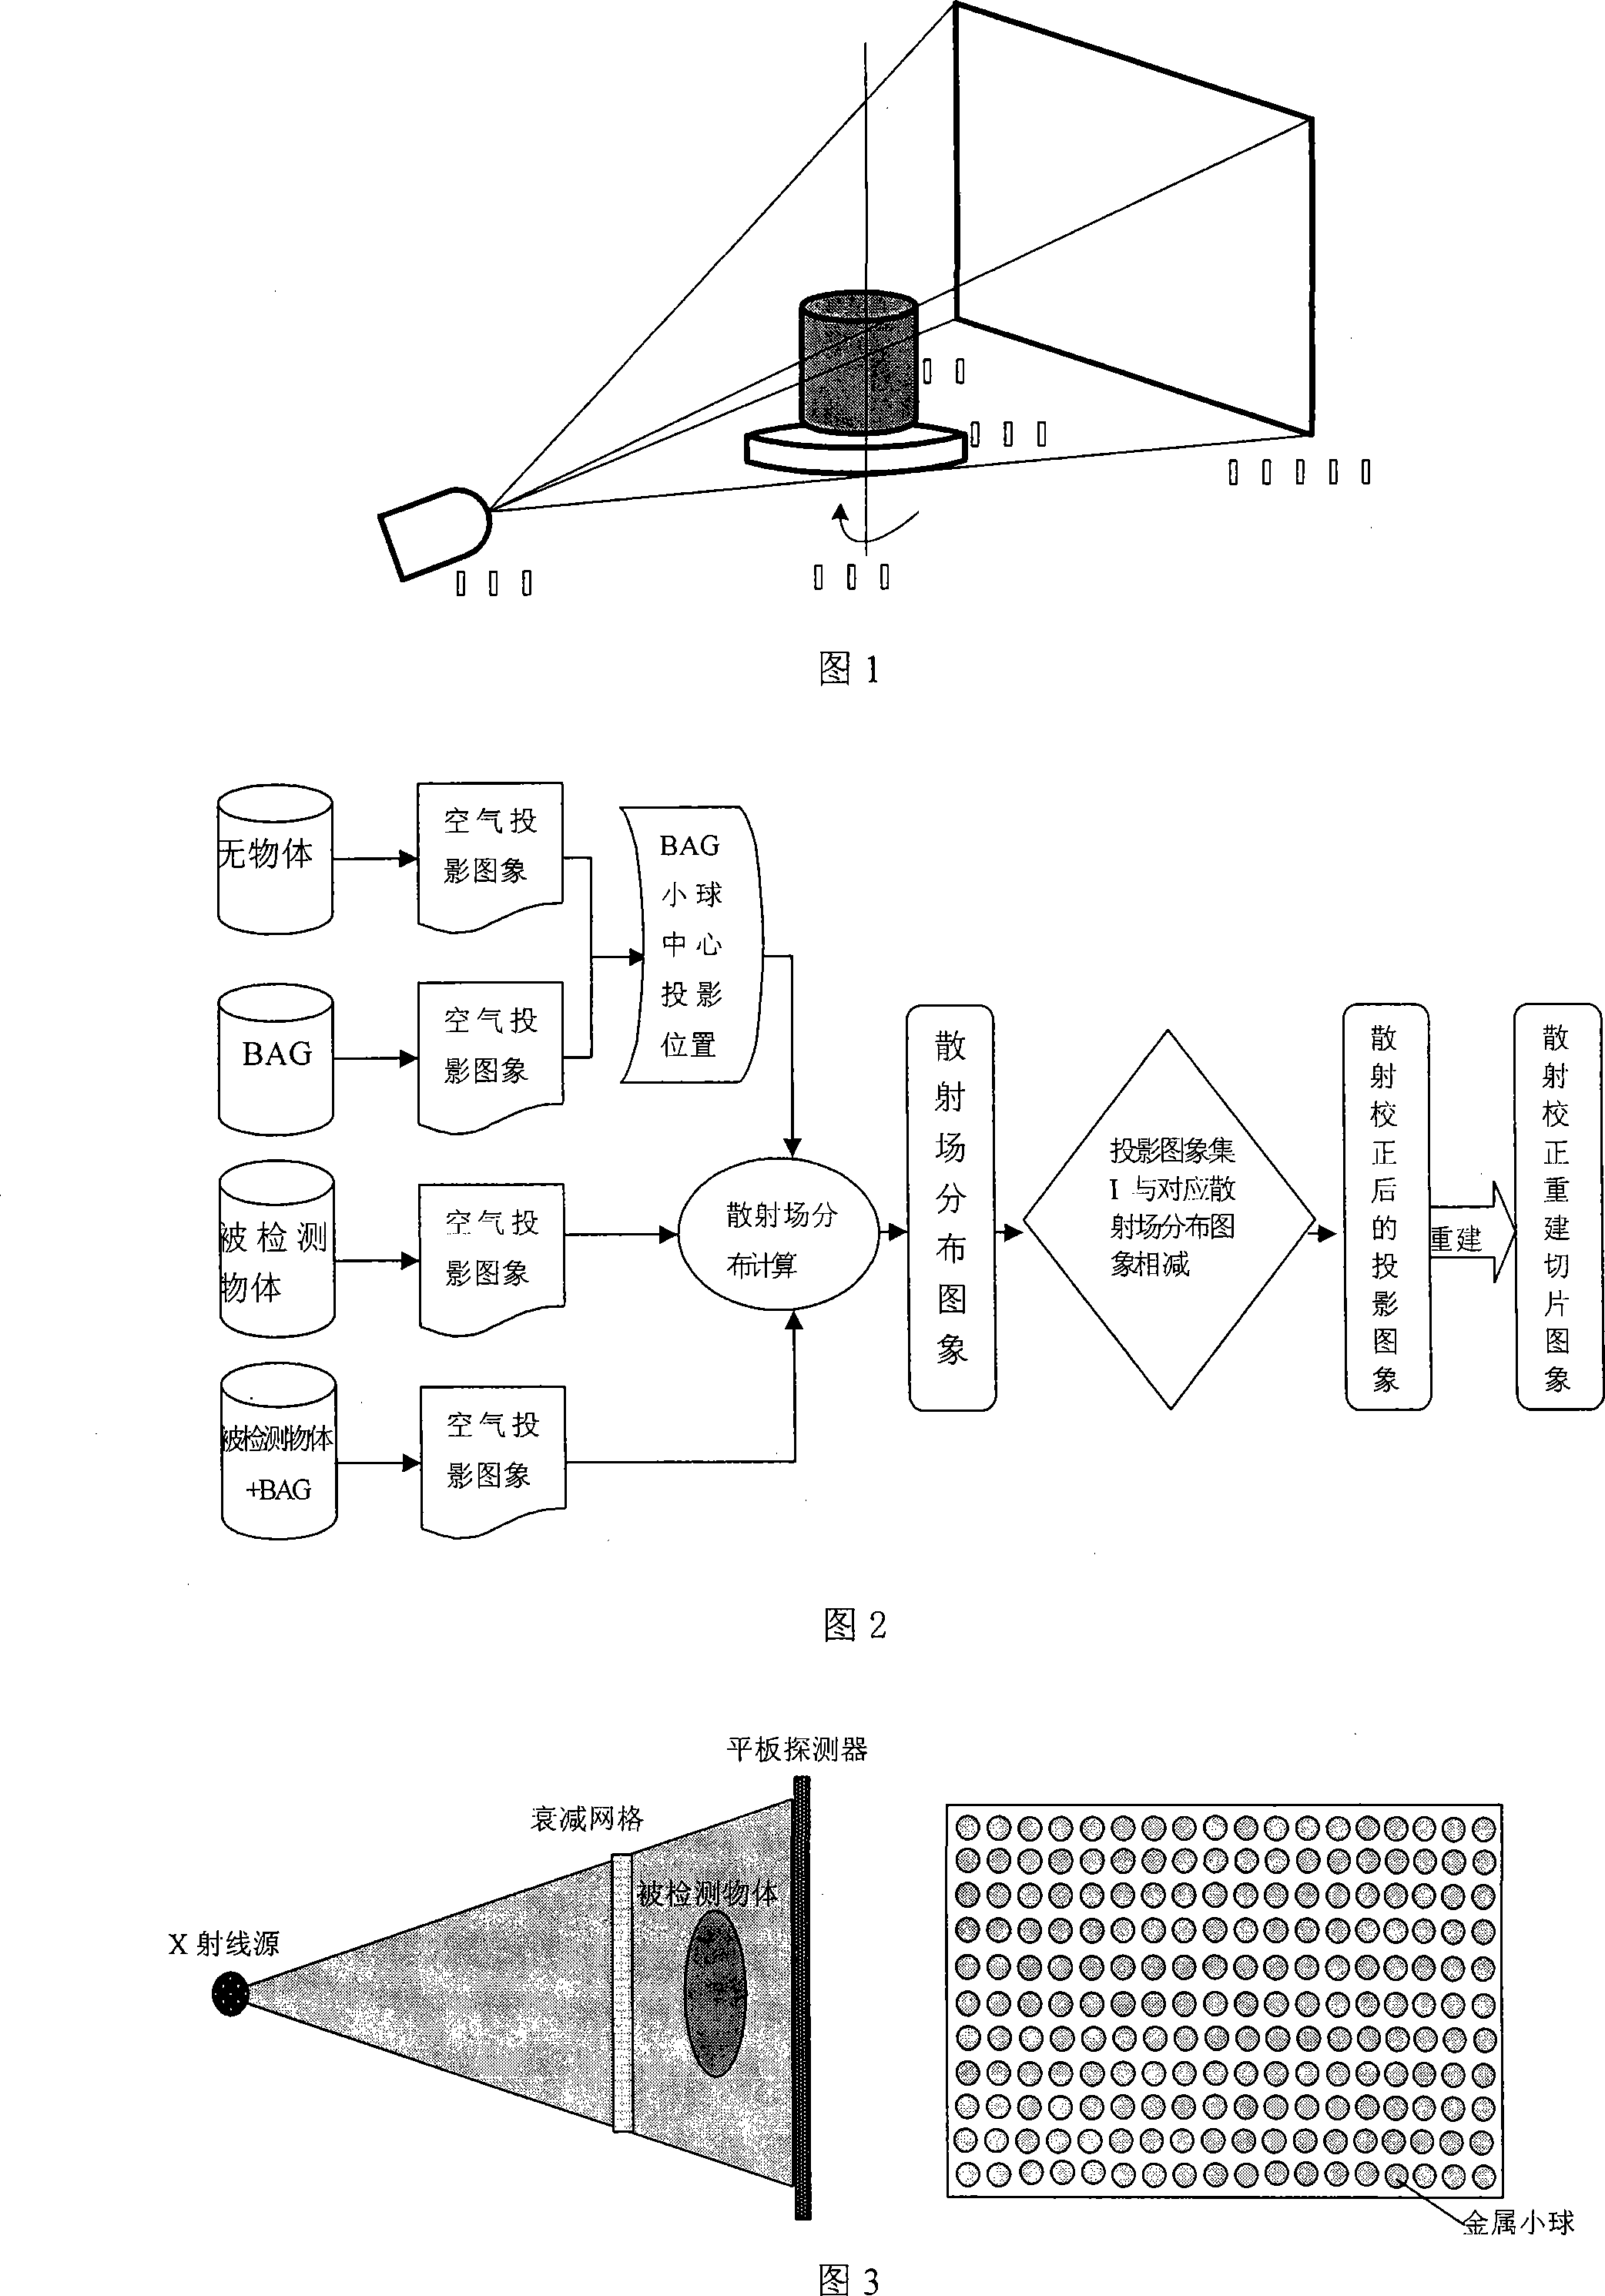 Diffuse transmission measuring and correcting method of cone-beam CT system